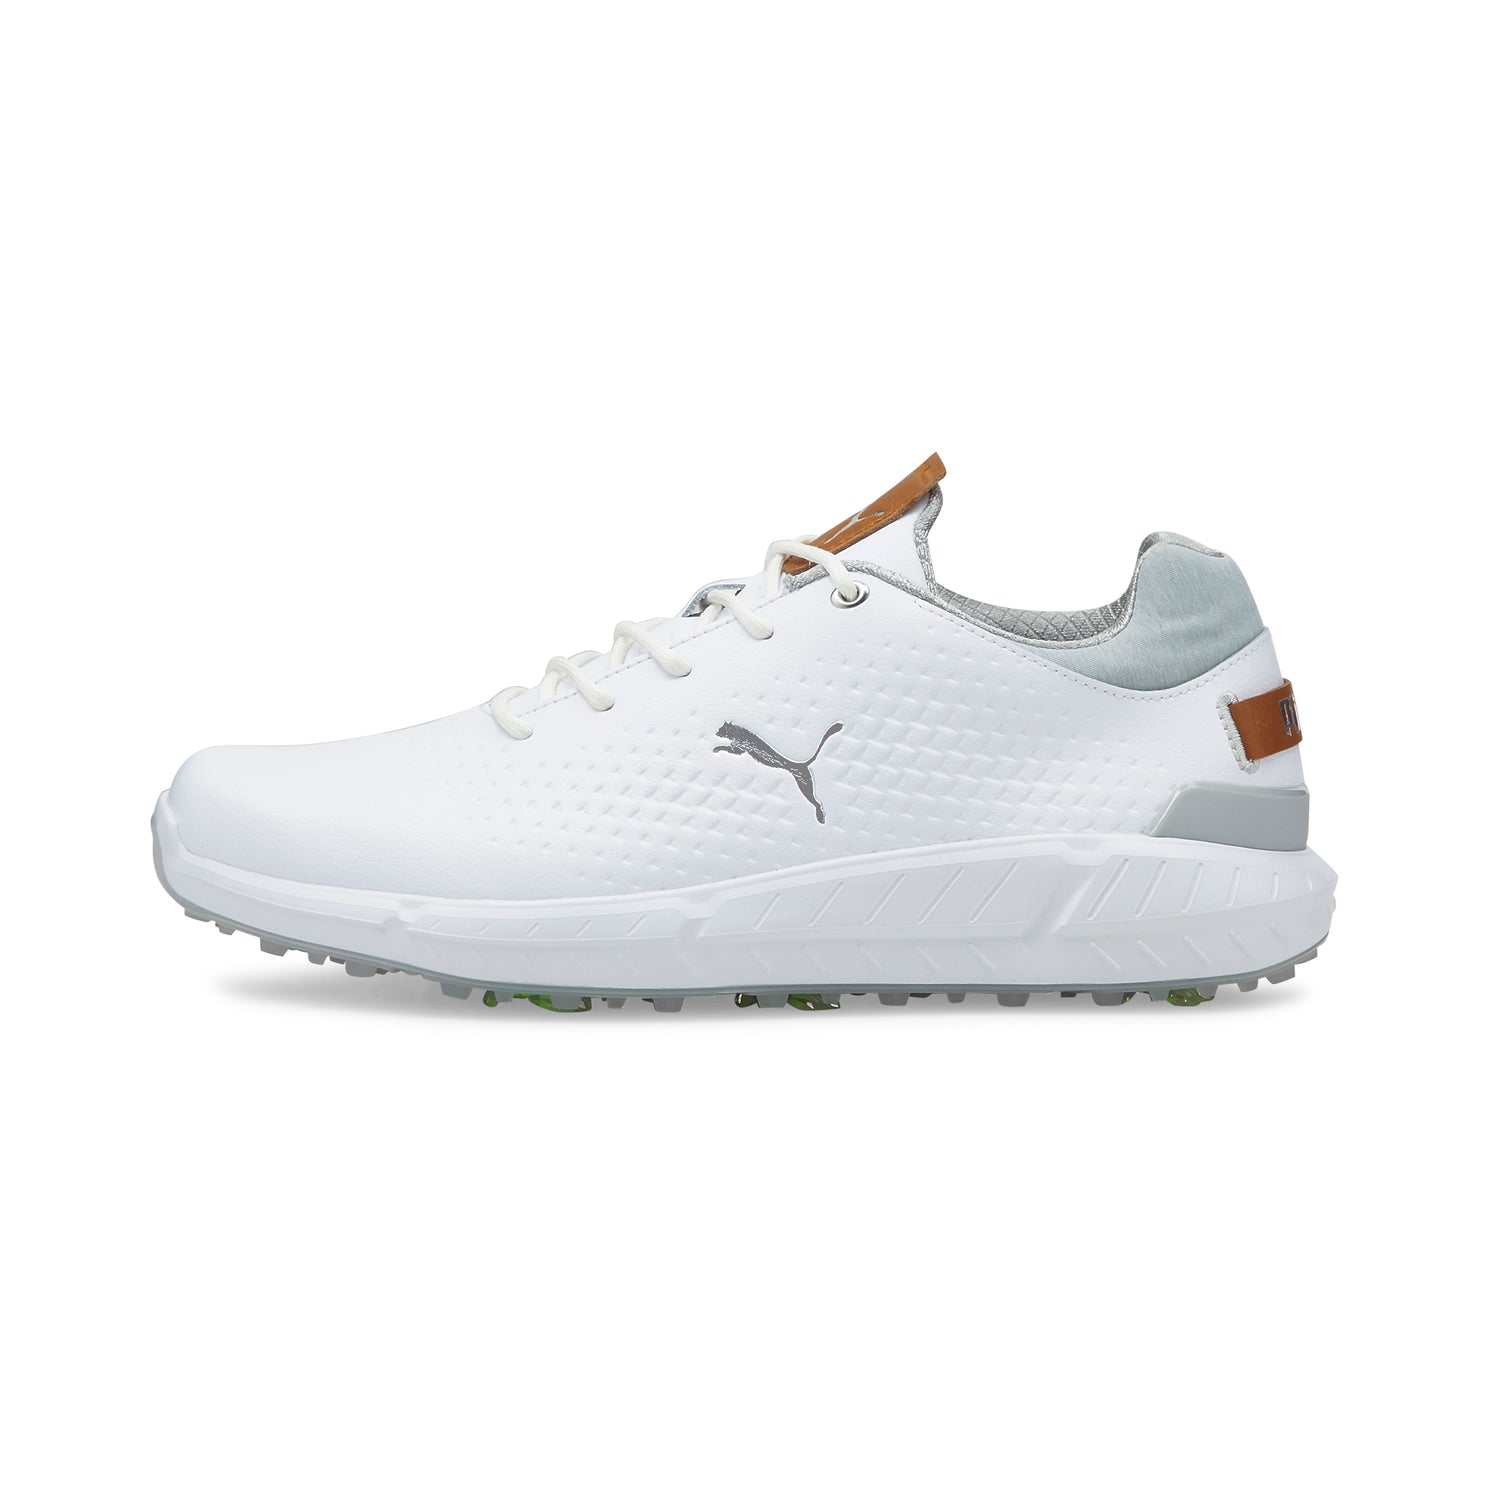 IGNITE Articulate Leather Shoes – Golf